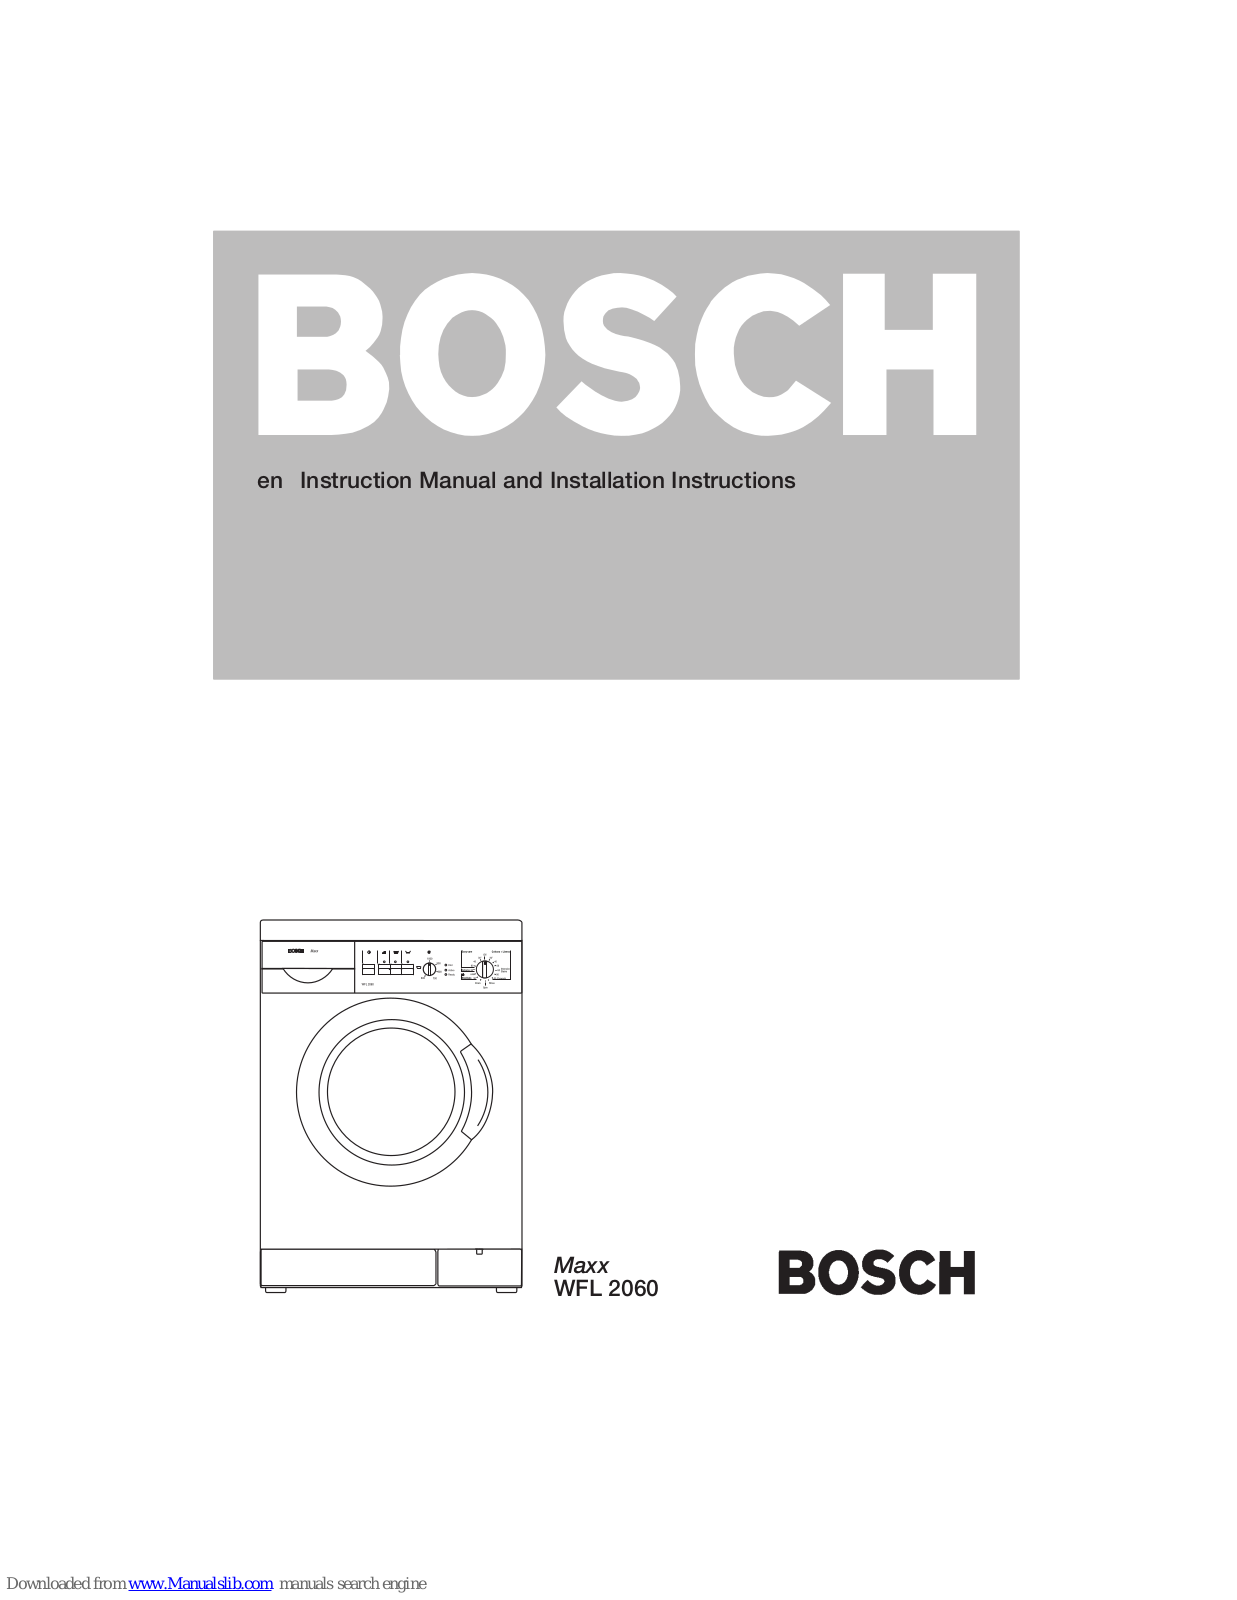 Bosch maxx WFL 2060 Instruction Manual And Installation Instructions